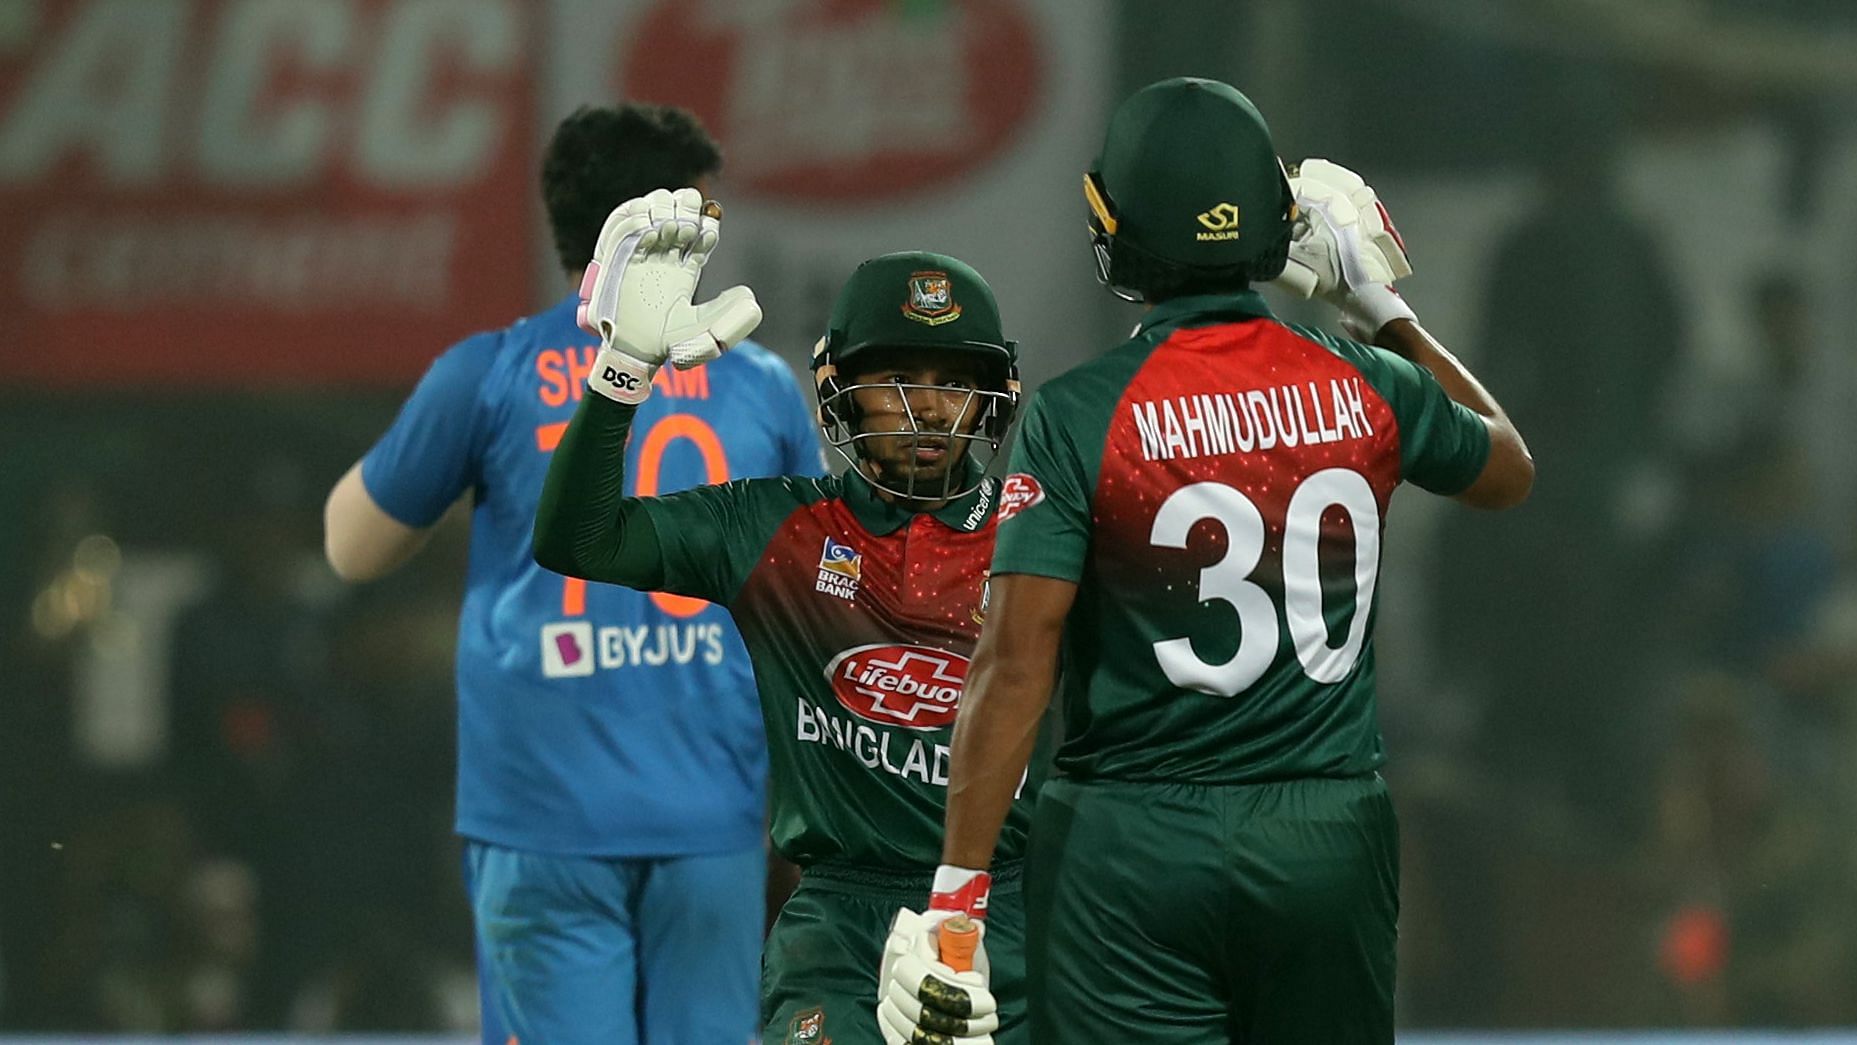  Bangladesh beat India in the Twenty20 cricket format for the first-ever time.